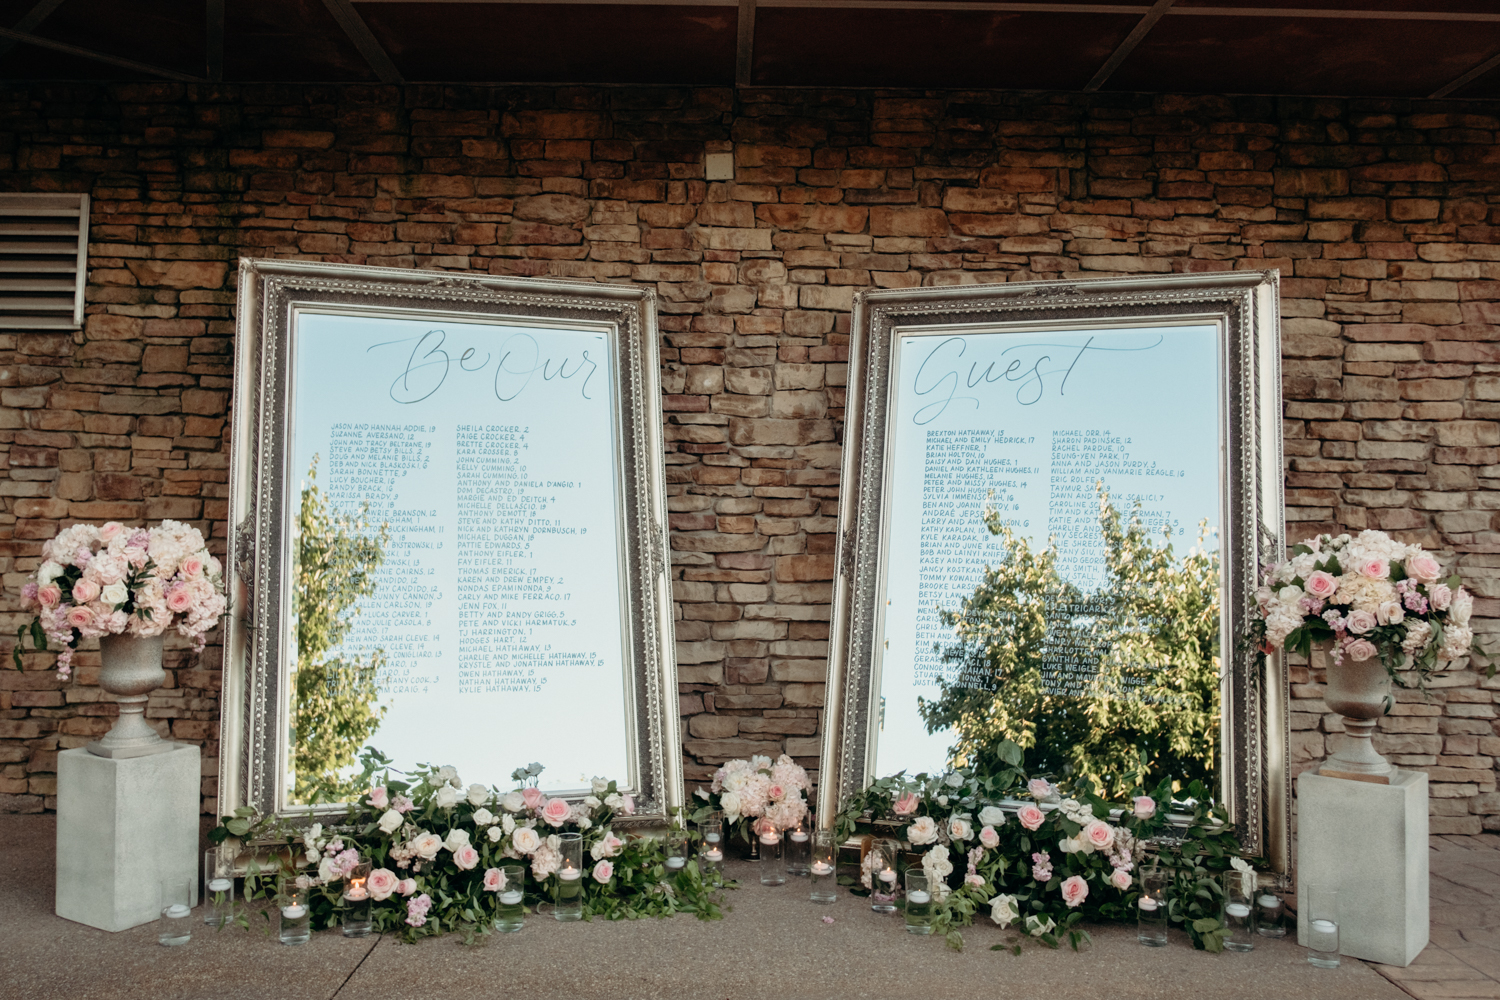 A seating chart for guests at a wedding reception is written on two large mirrors surrounded by lush florals.  